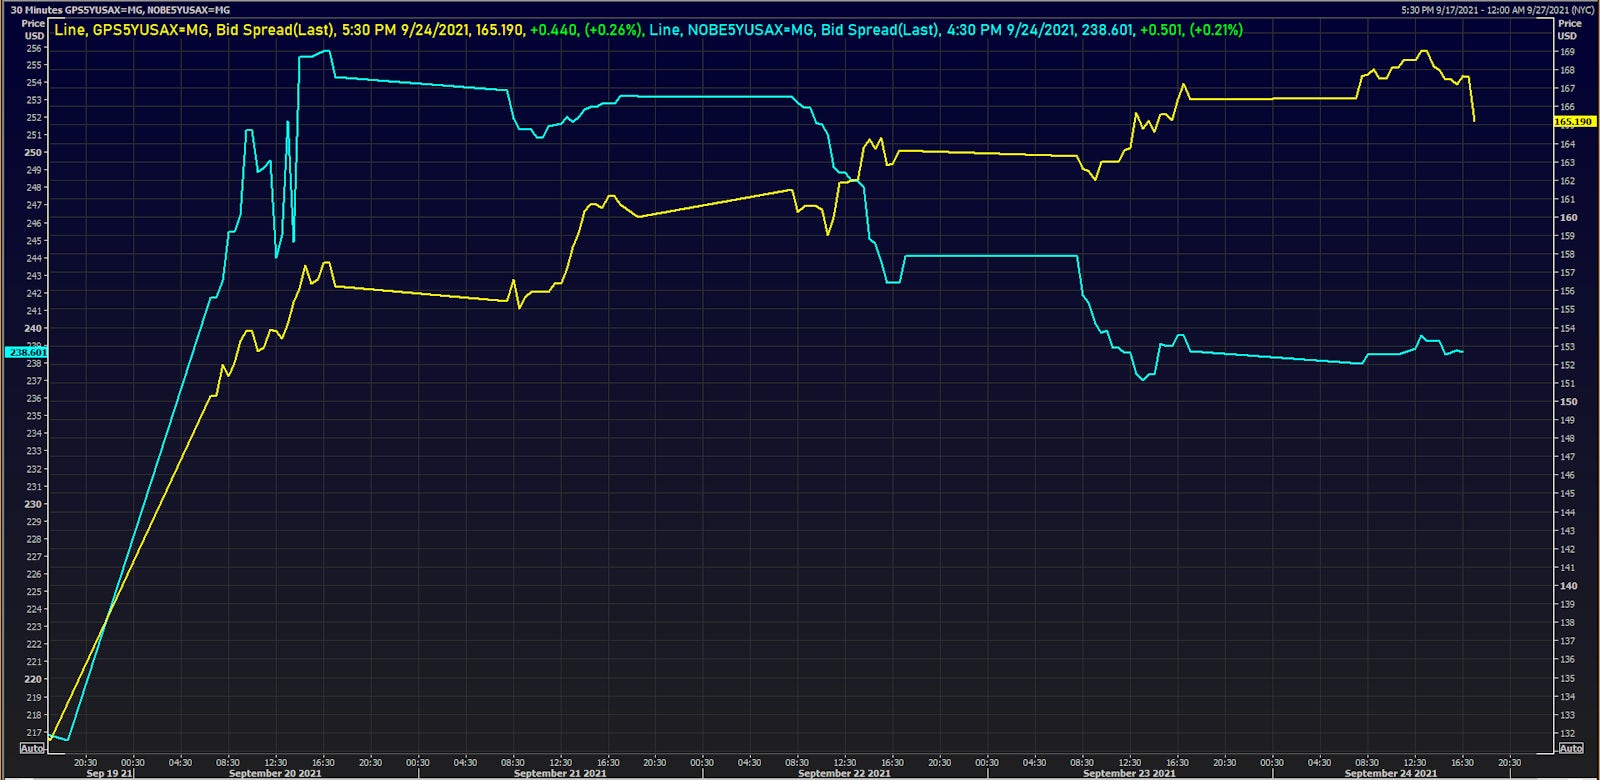 Nordstrom and Gap Both Saw A Significant Widening In Their 5Y USD CDS Spreads This Week | Source: Refinitiv